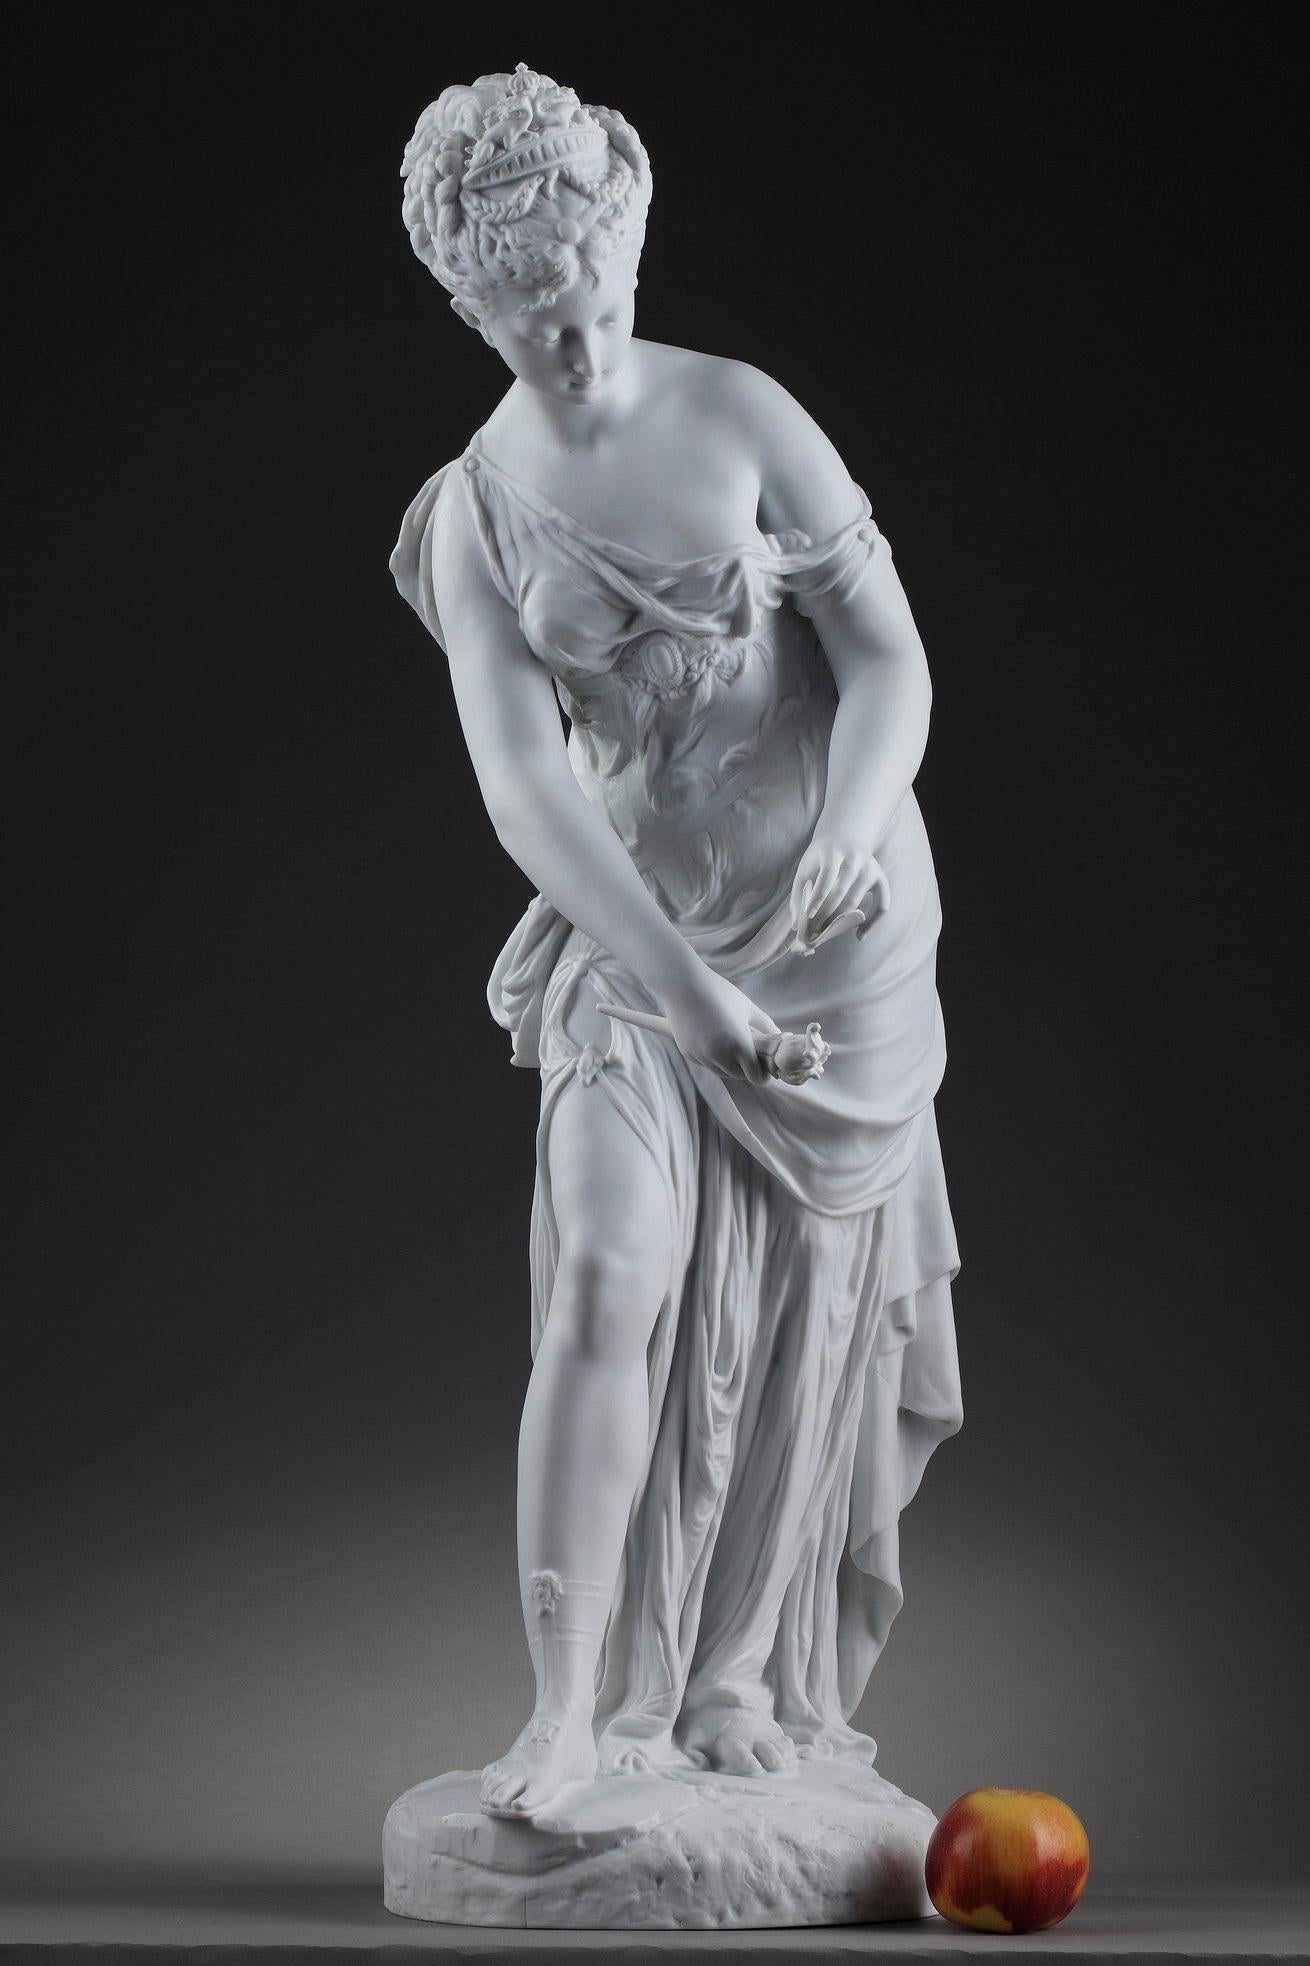 The figure of Psyche holding torch and butterfly is the subject of this bisque statue by the Parisian Dione & Baury manufactory. In ancient Greece, Psyche was a princess of great beauty and goddess of the soul. She felt in love with Eros (Cupid),